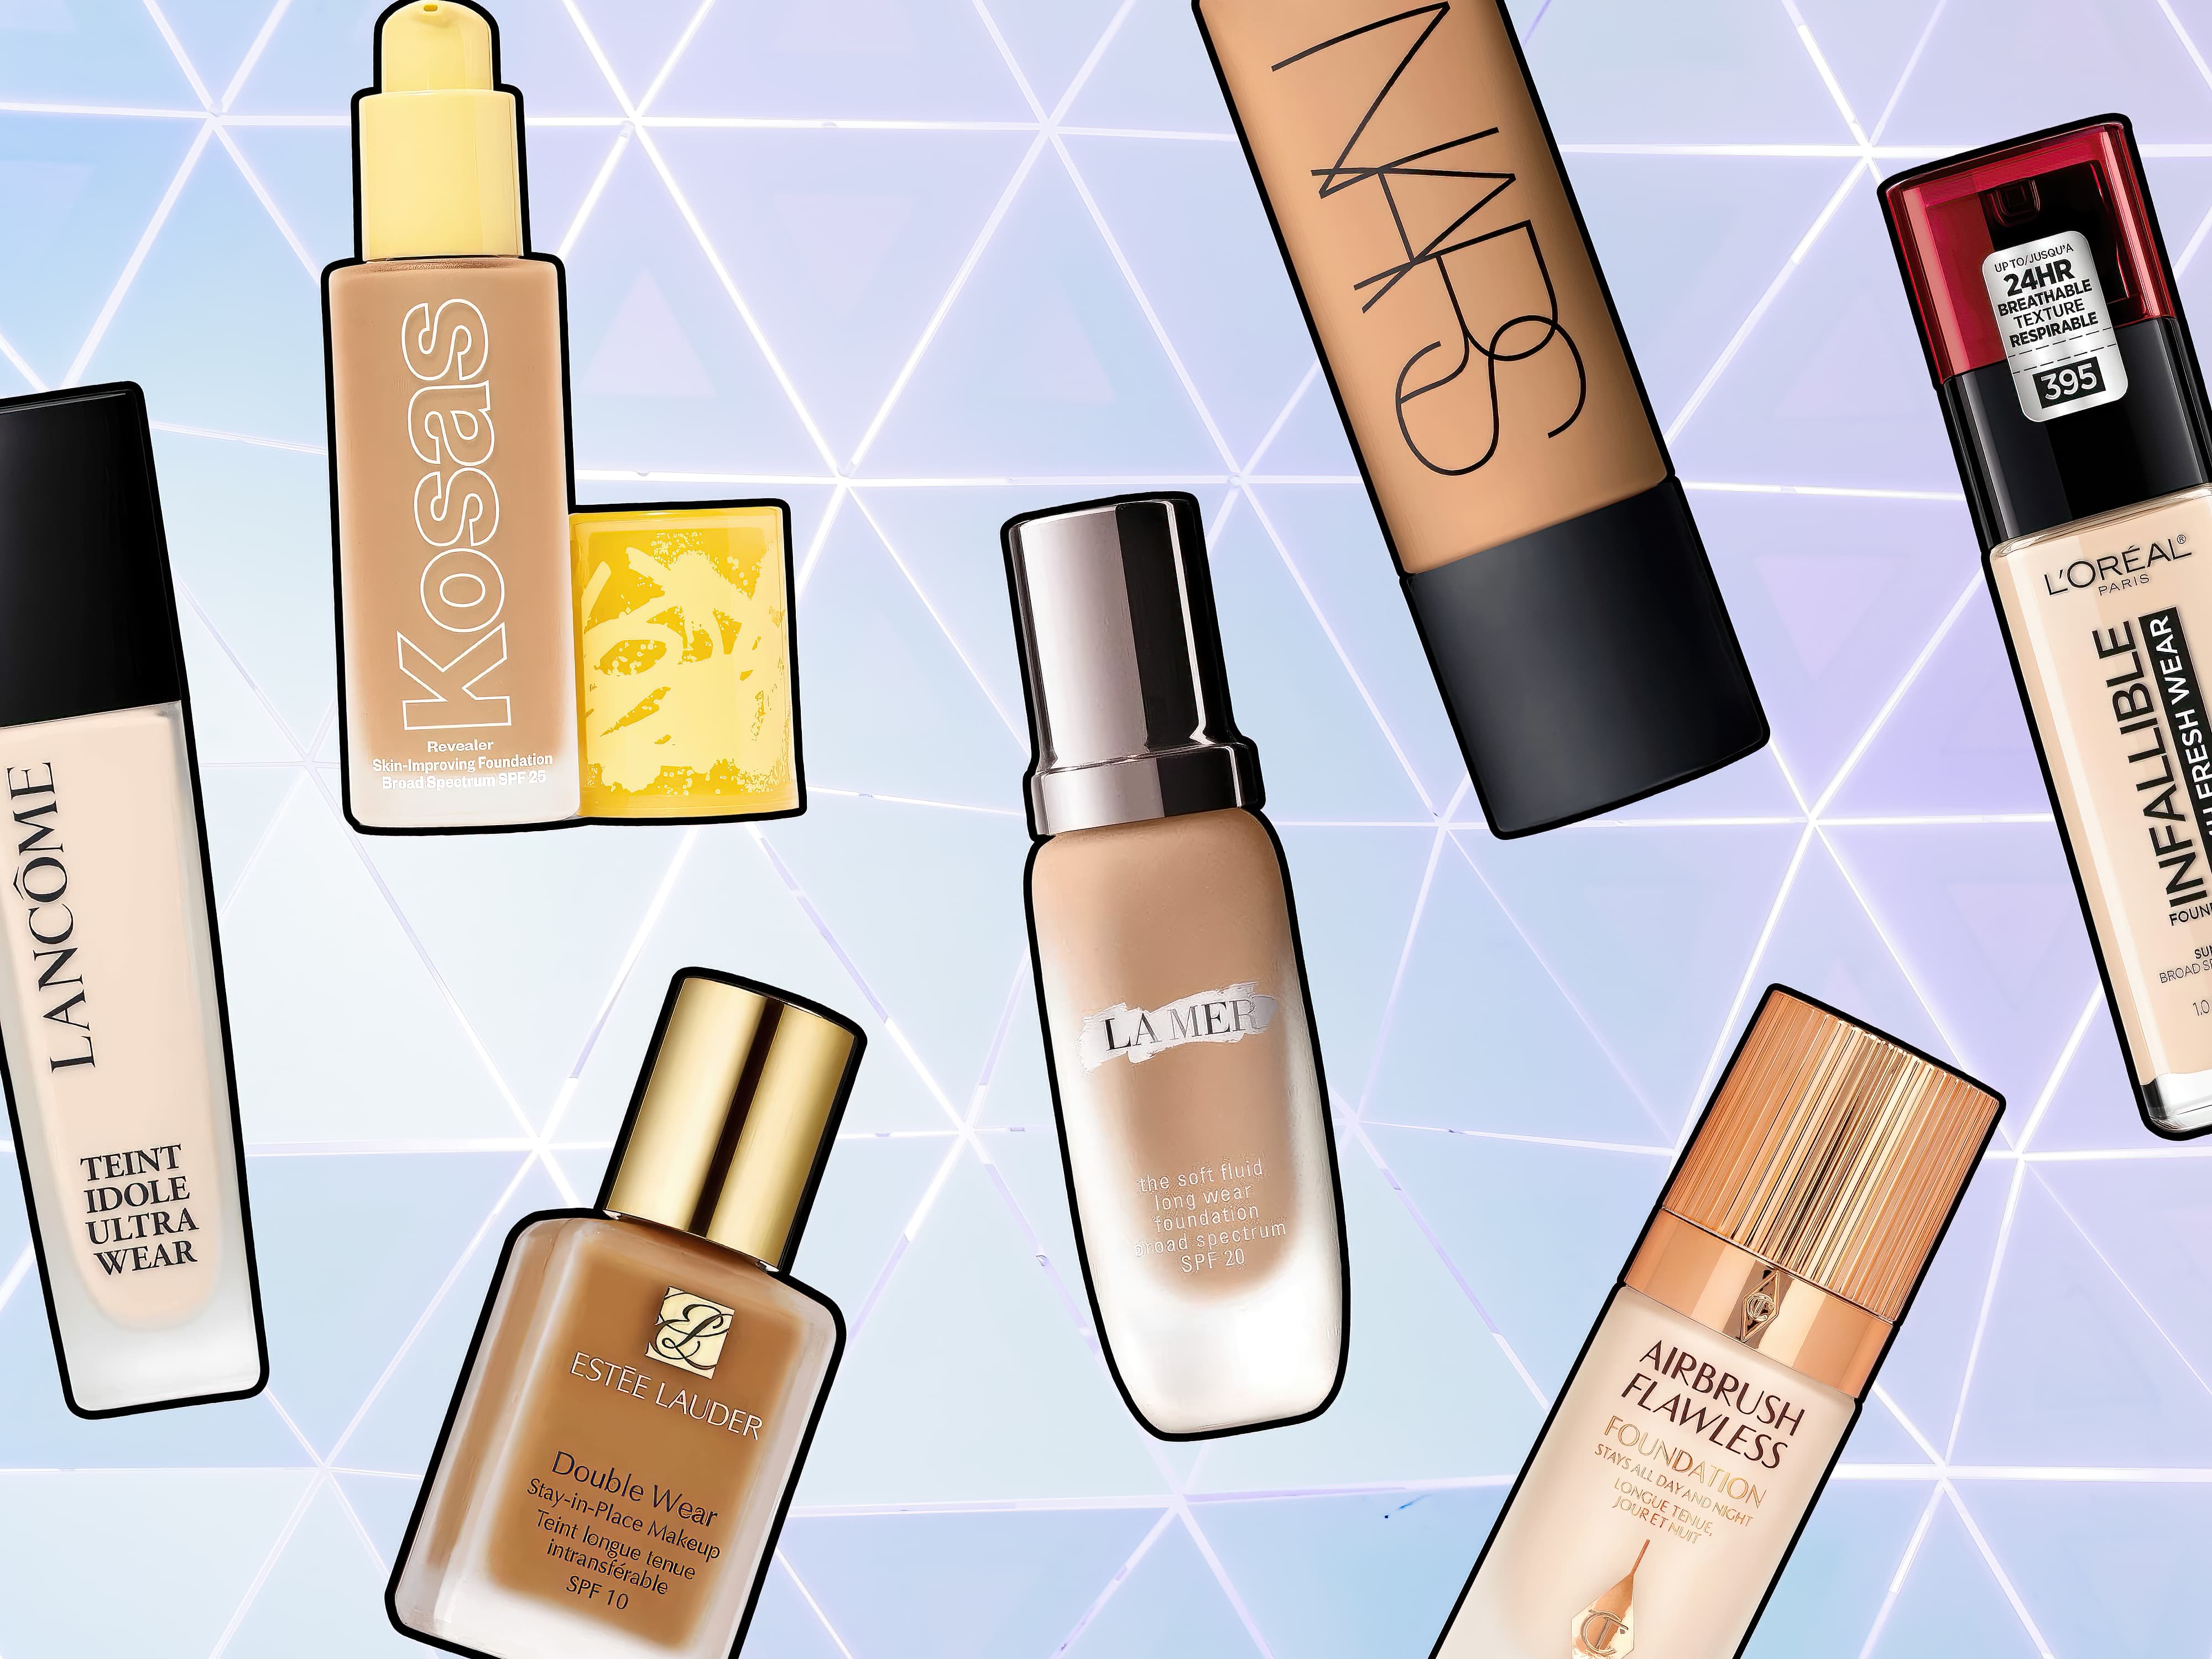 Assorted brands of the best foundations displayed on a geometric background